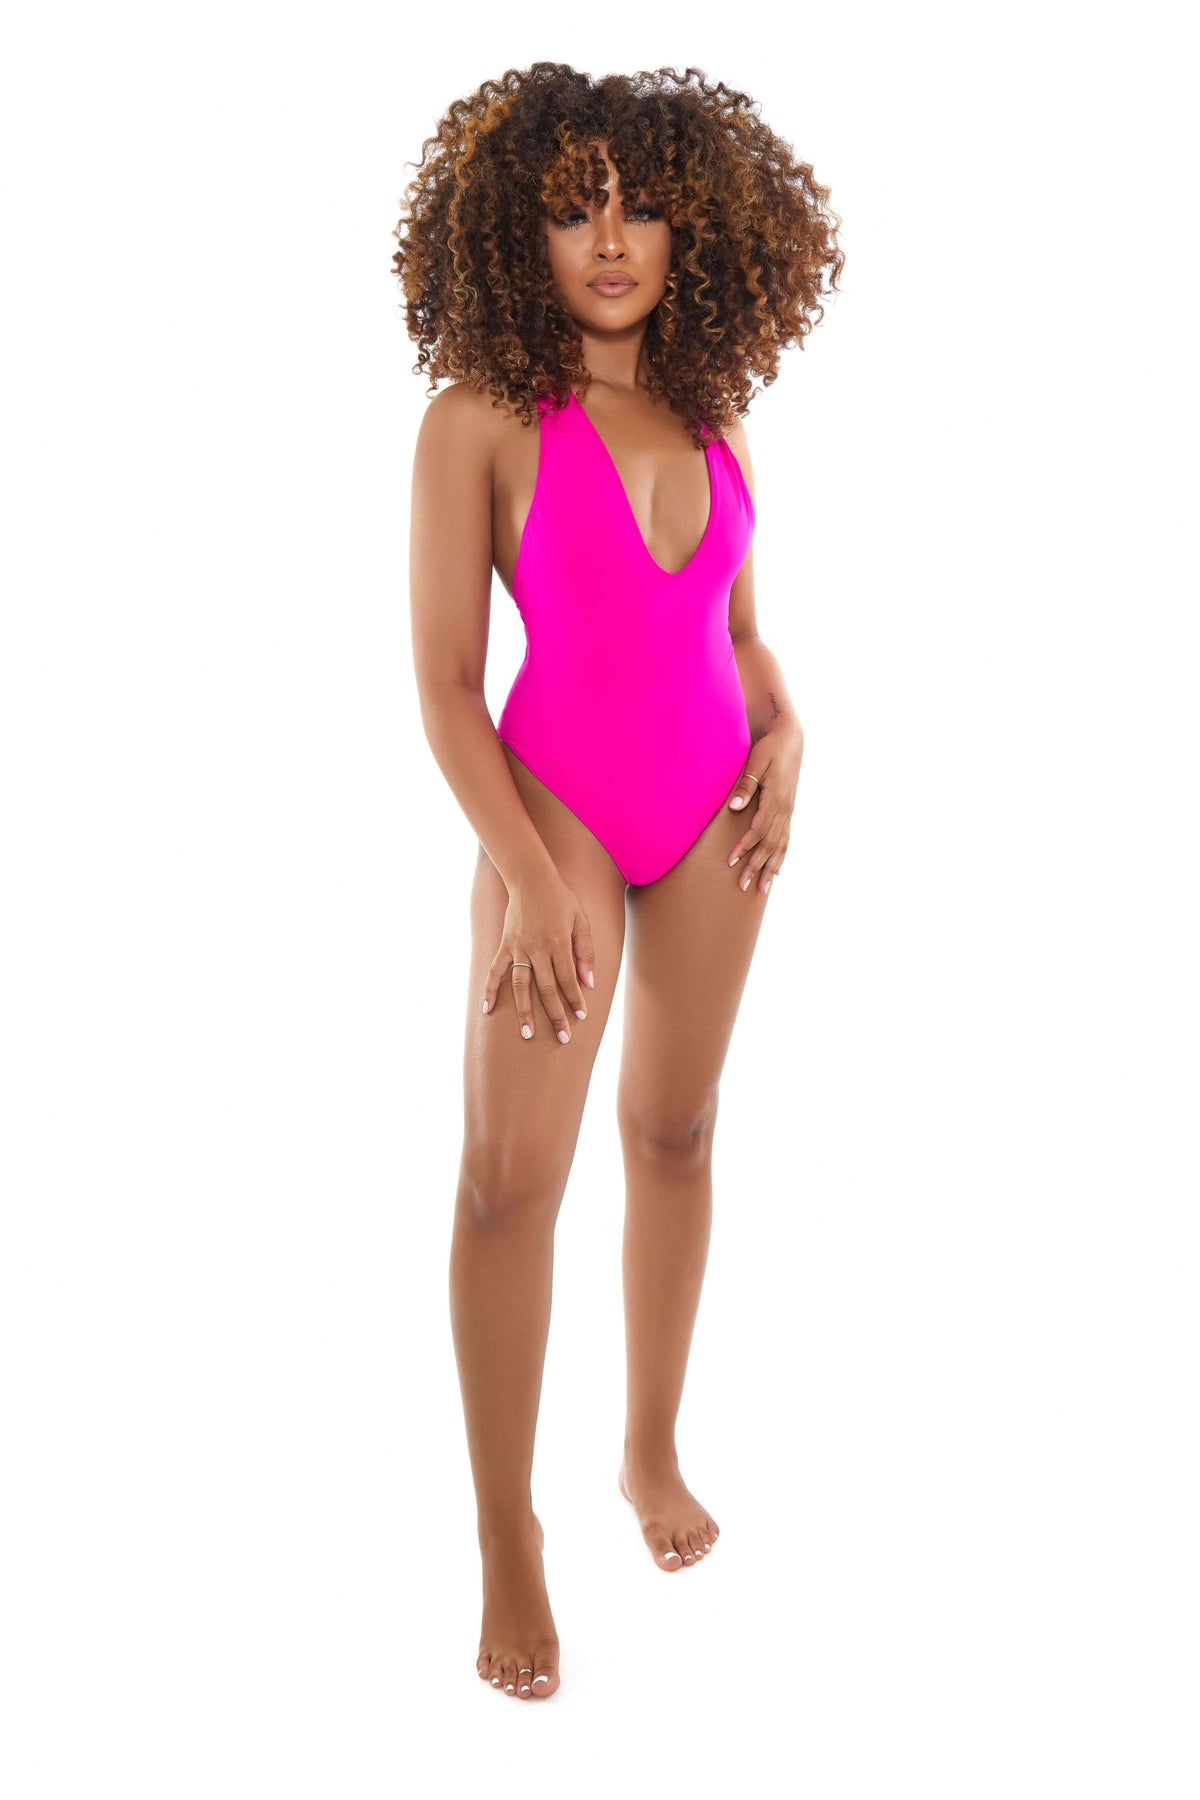 SUBRIYAH High Cut One Piece Swimsuit With Adjustable Straps - Virago Swim